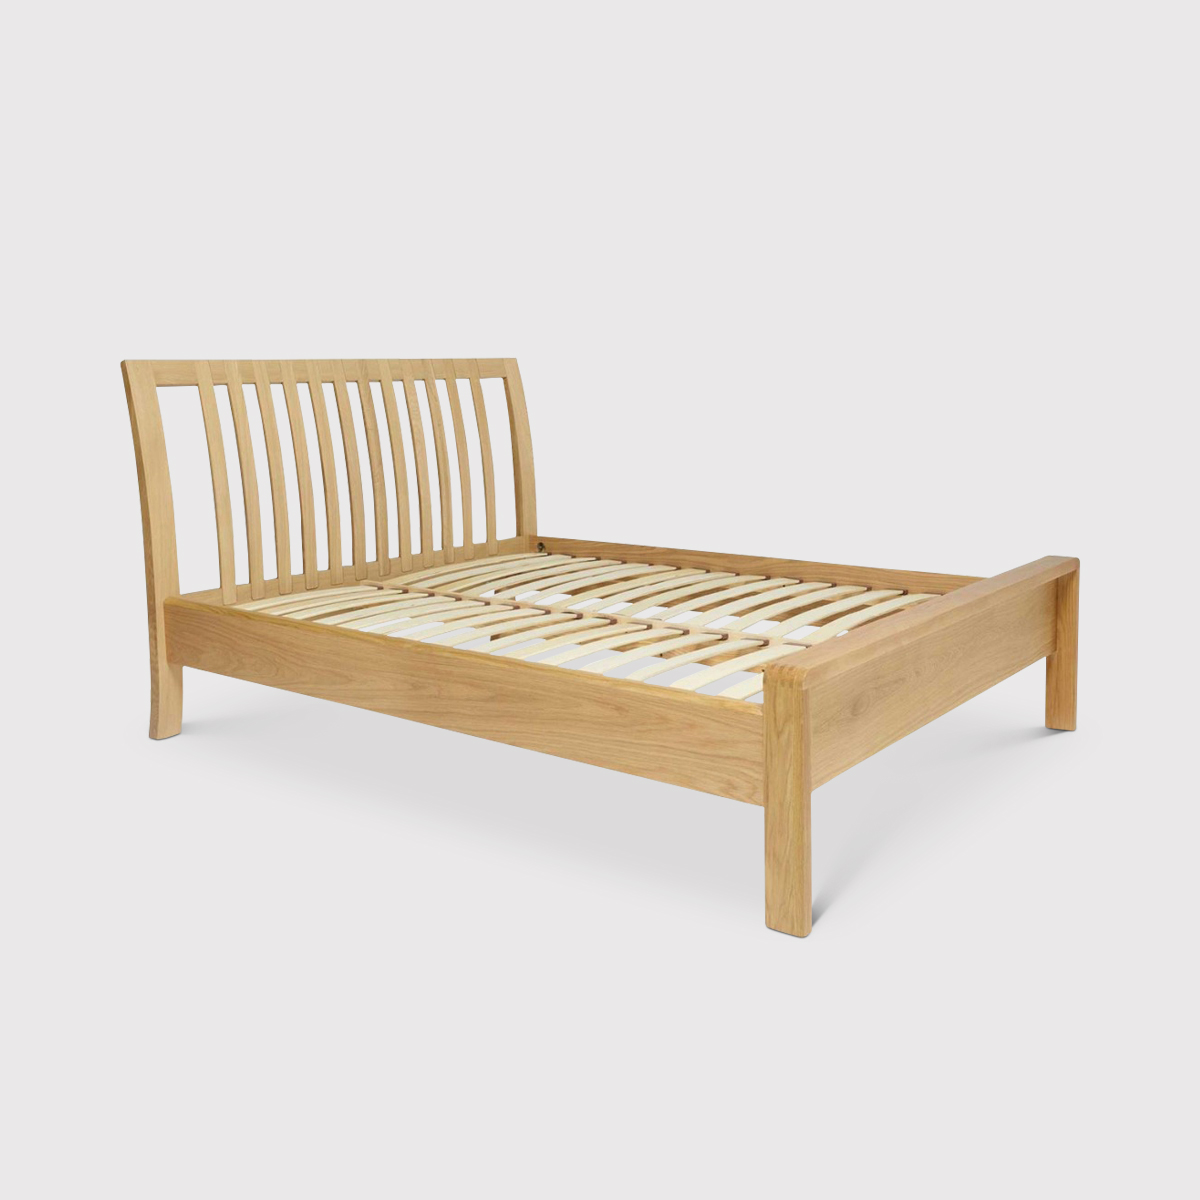 Ercol Bosco Double Bed, Brown | Barker & Stonehouse